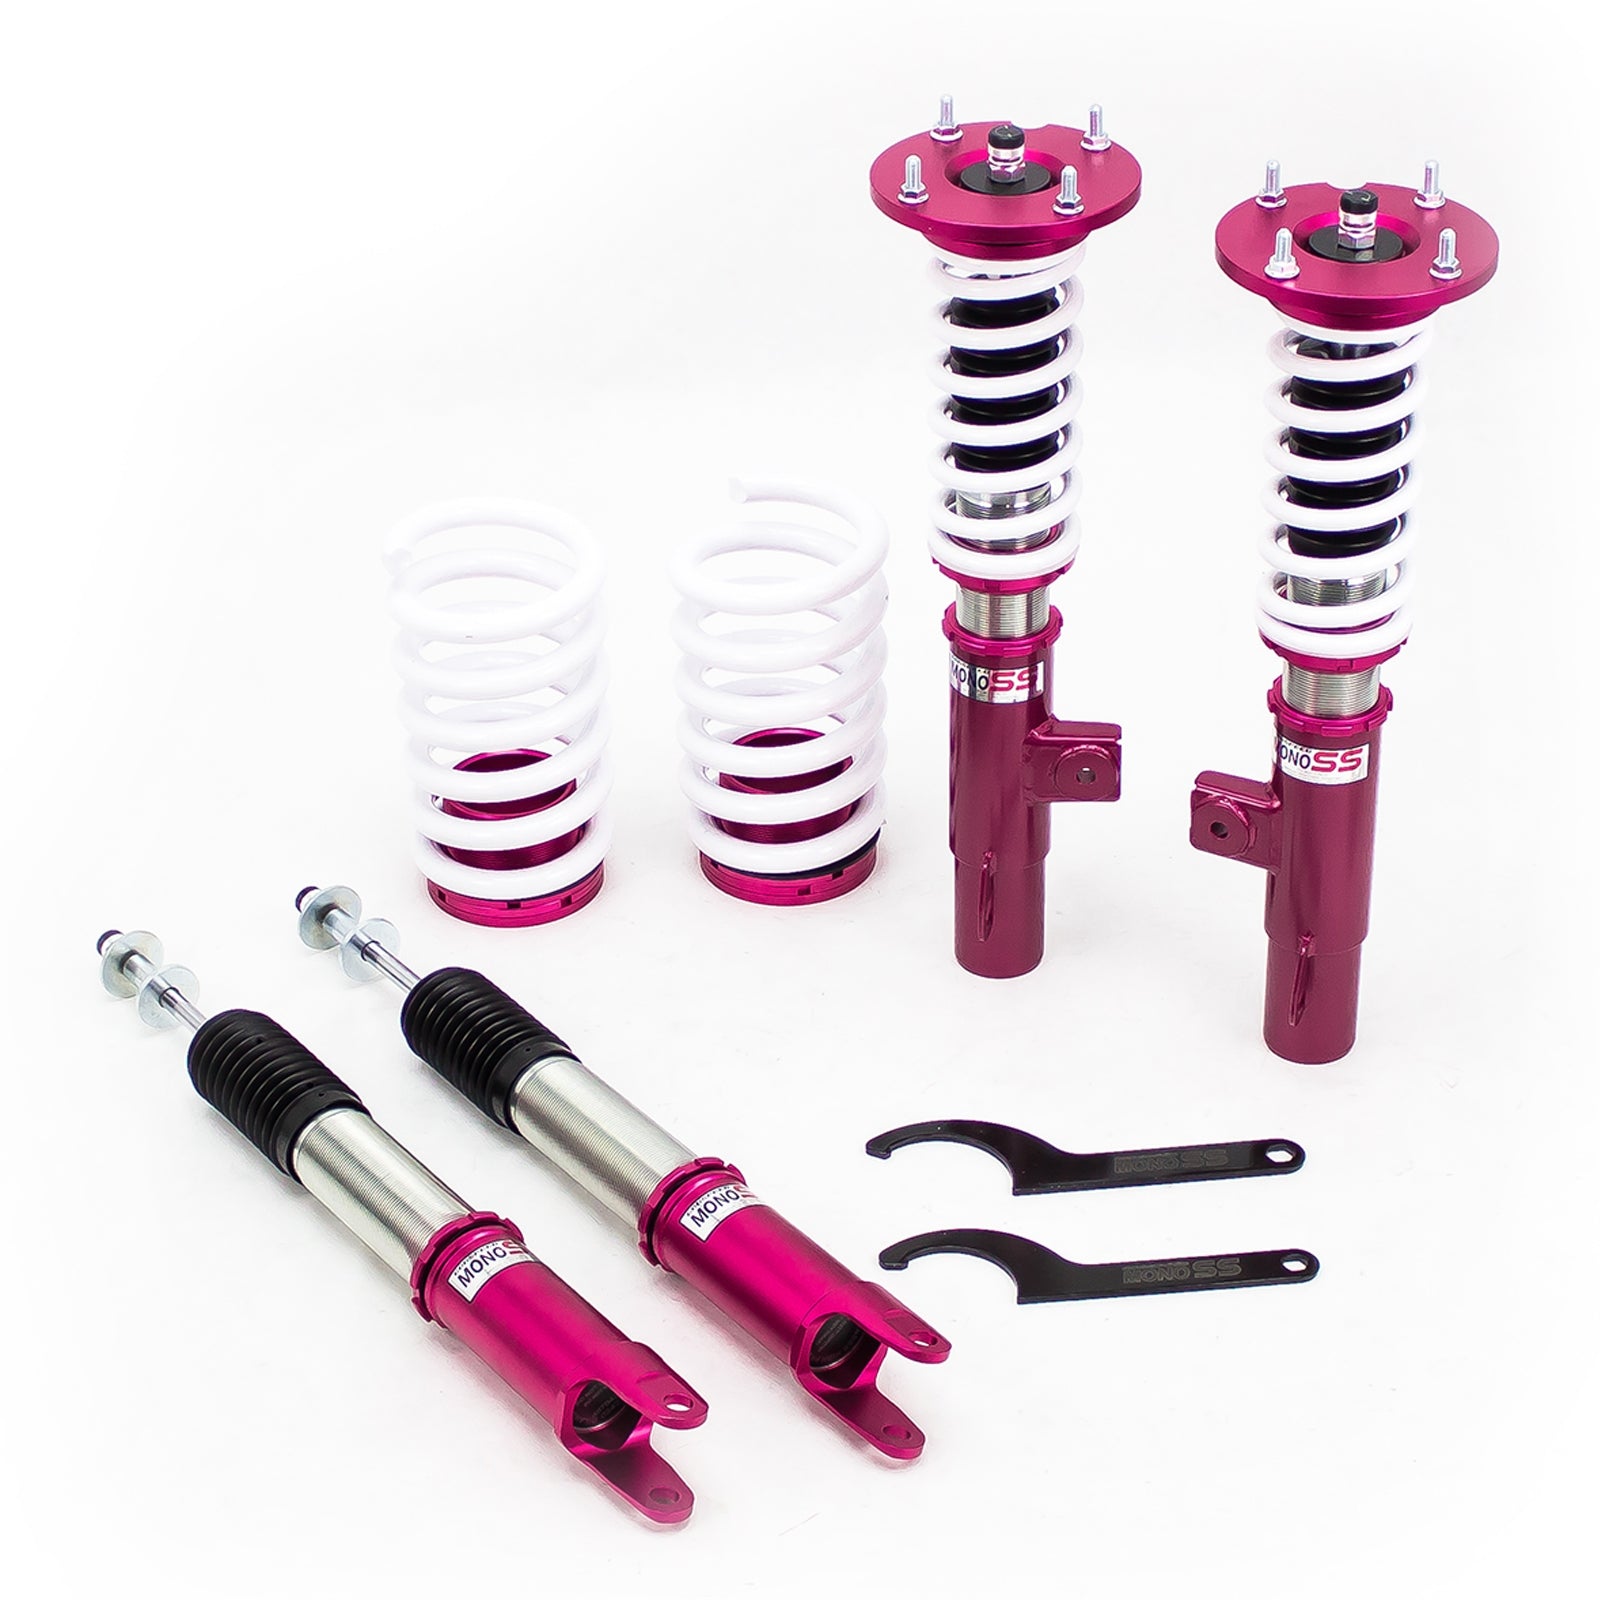 Godspeed MSS0142-B MonoSS Coilover Lowering Kit, Fully Adjustable, Ride Height, Spring Tension And 16 Click Damping, Ford Flex 2009-12